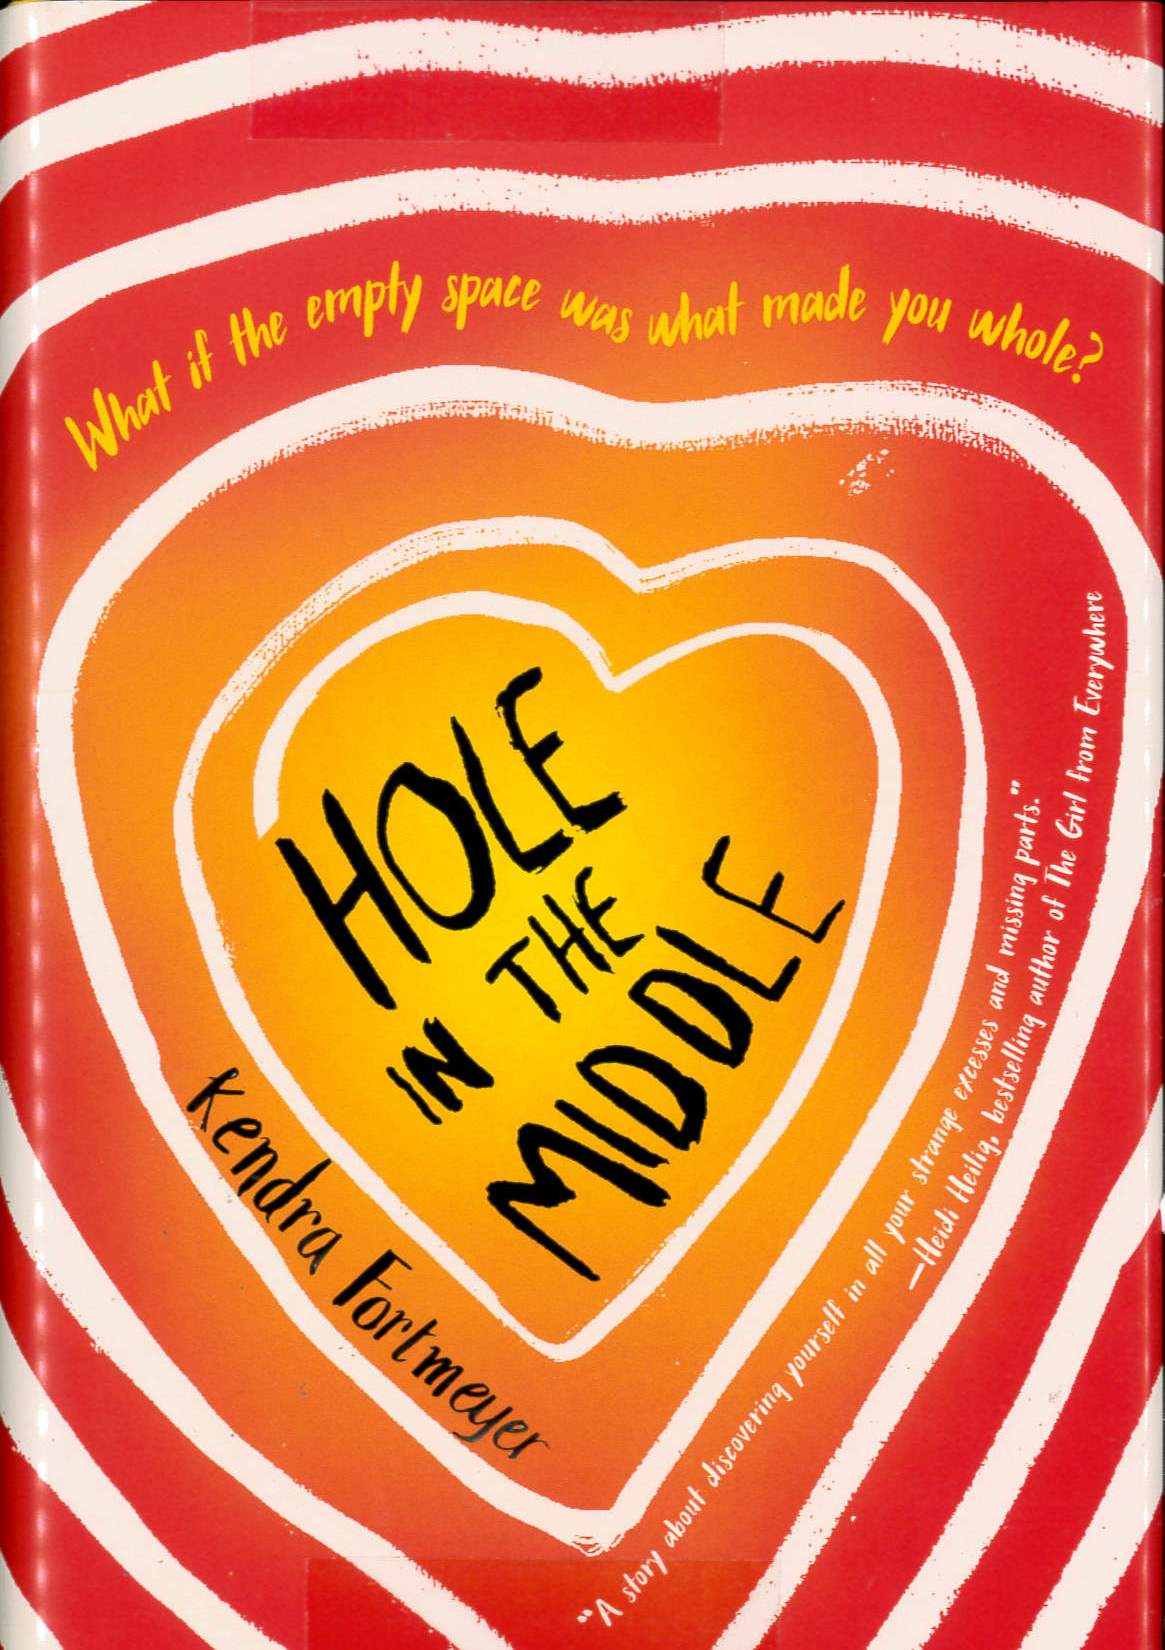 Hole in the middle /